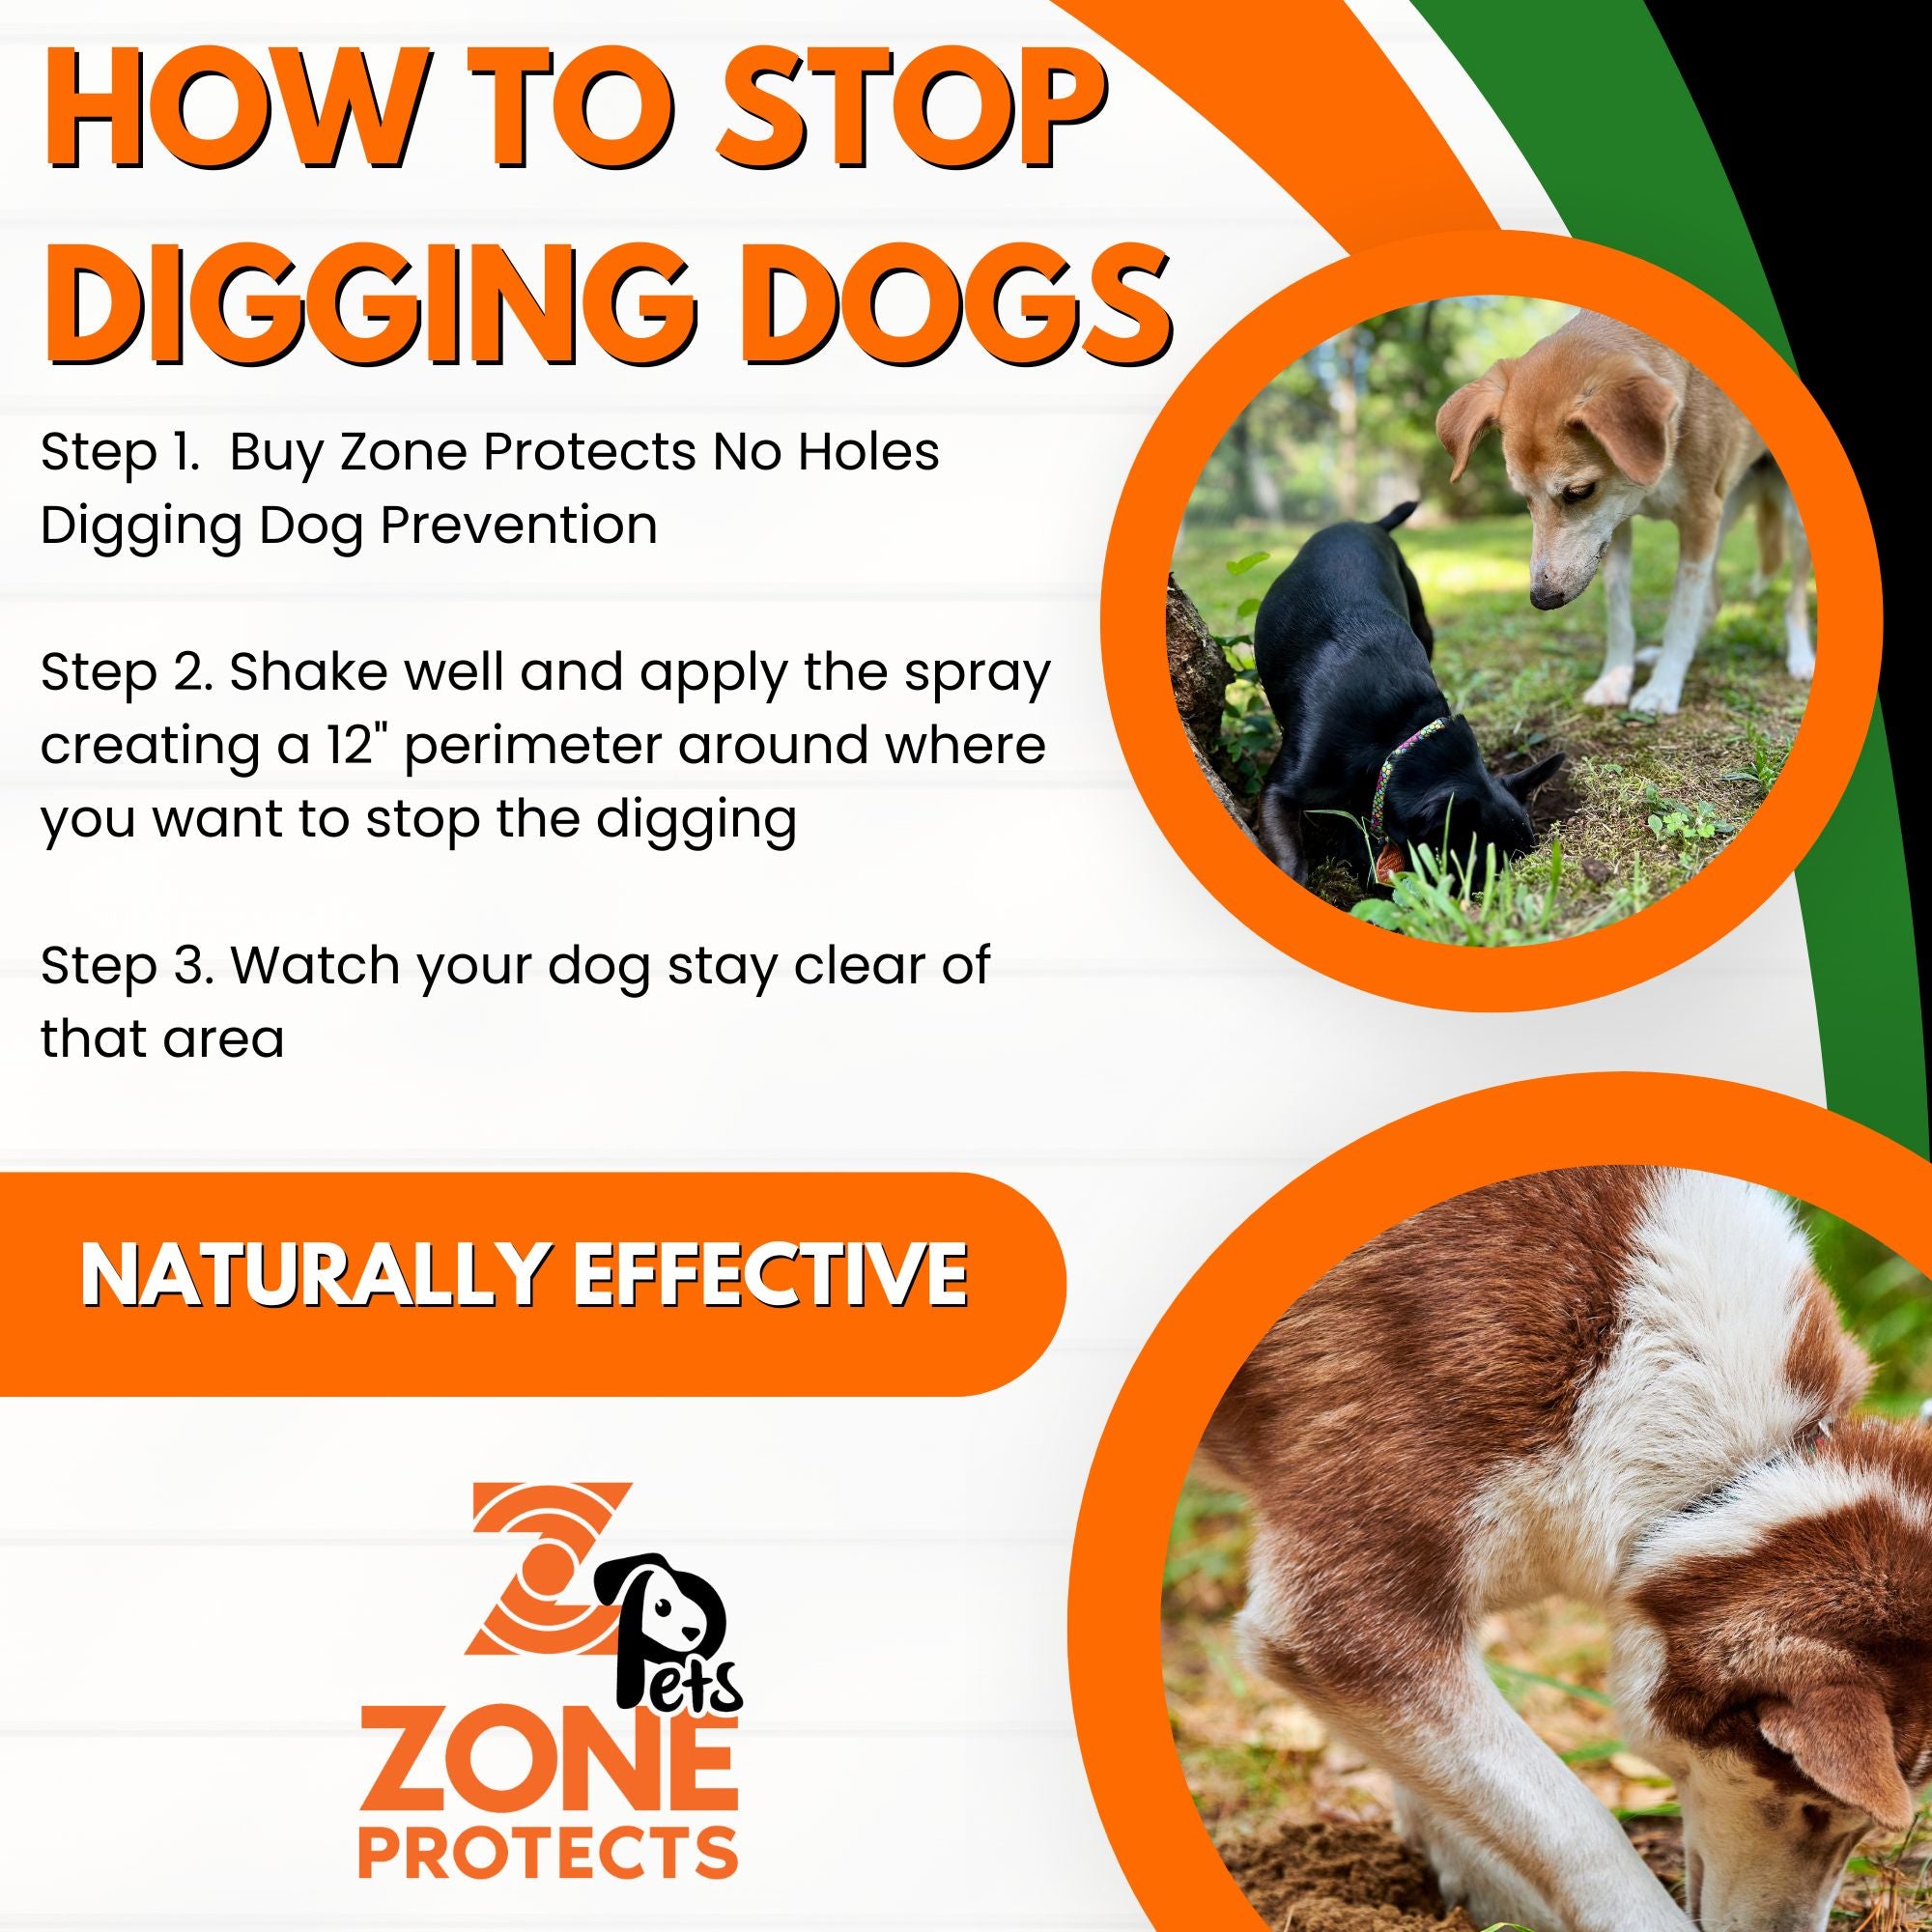 No Holes! Digging Prevention Concentrate - Twin Bundle